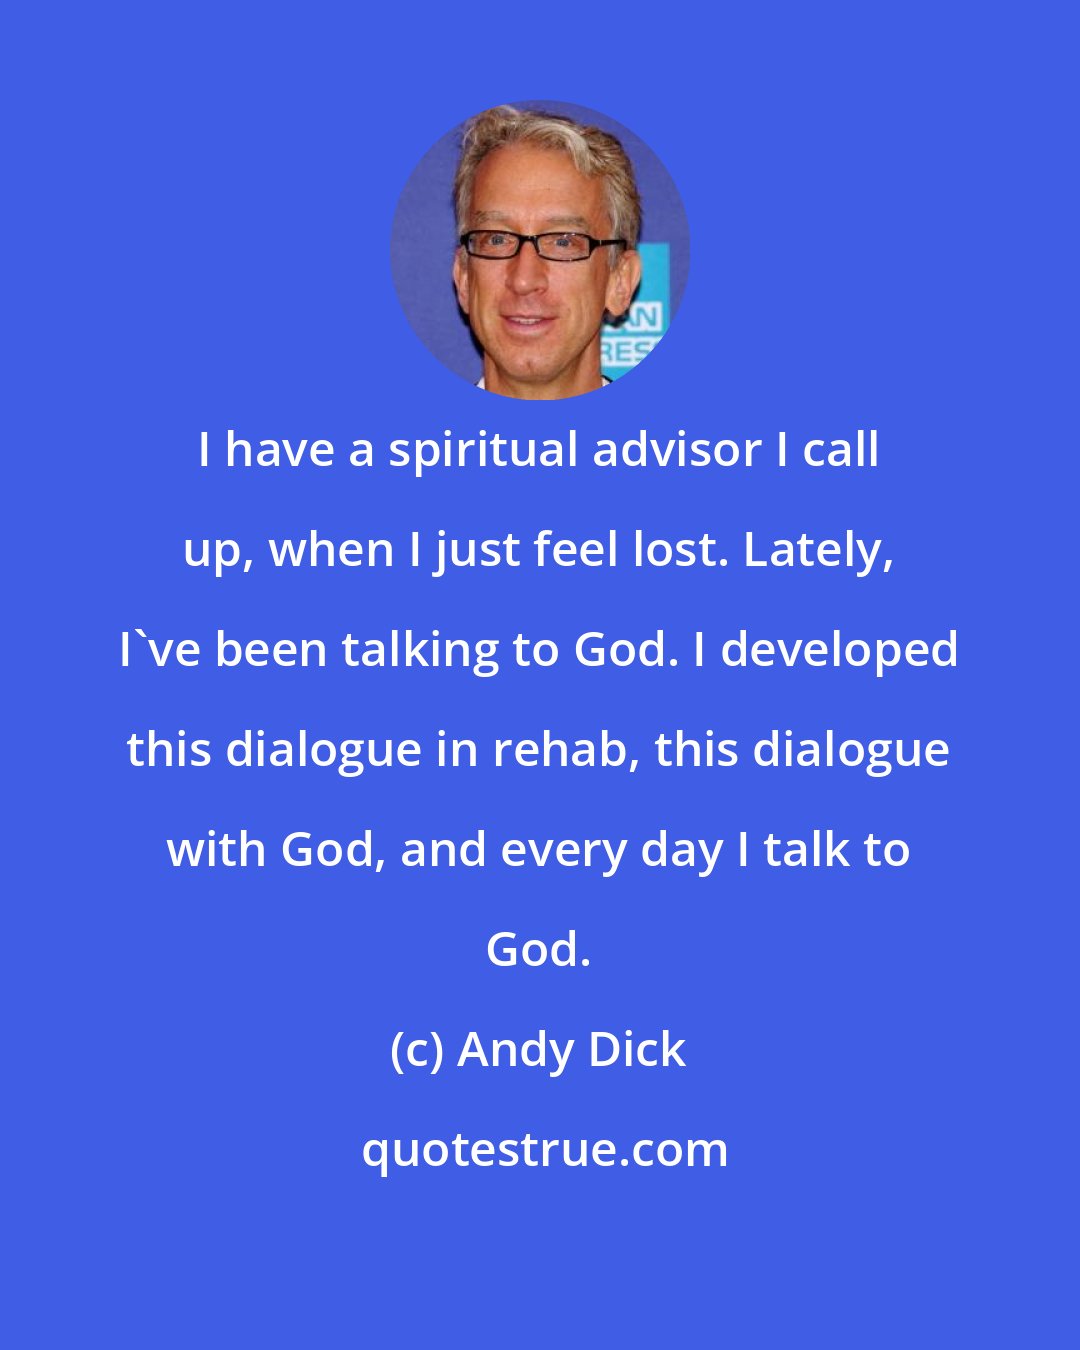 Andy Dick: I have a spiritual advisor I call up, when I just feel lost. Lately, I've been talking to God. I developed this dialogue in rehab, this dialogue with God, and every day I talk to God.